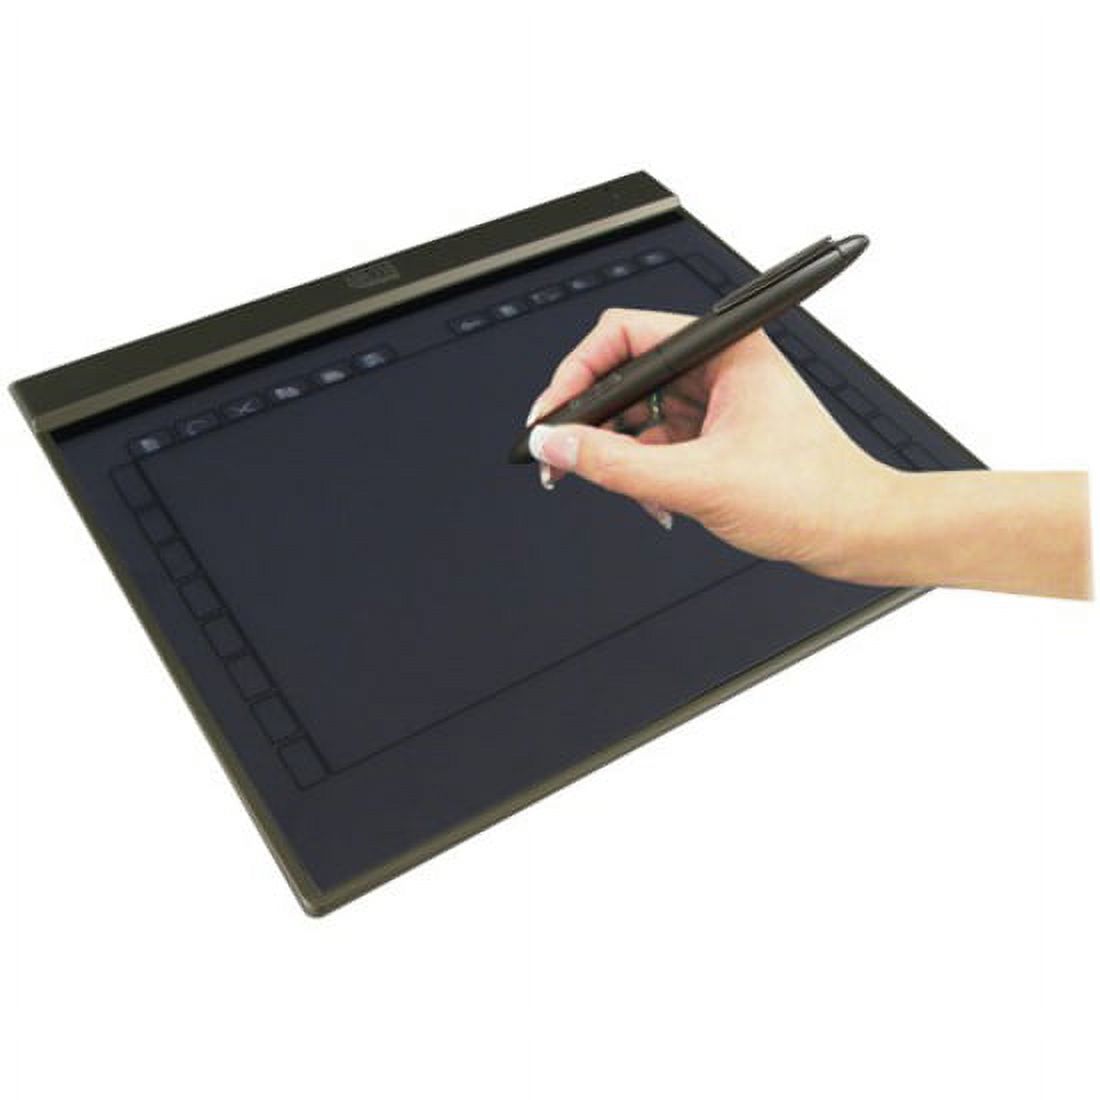 Adesso Cybertablet Z12 Ultra Slim Graphics Tablet - image 1 of 2